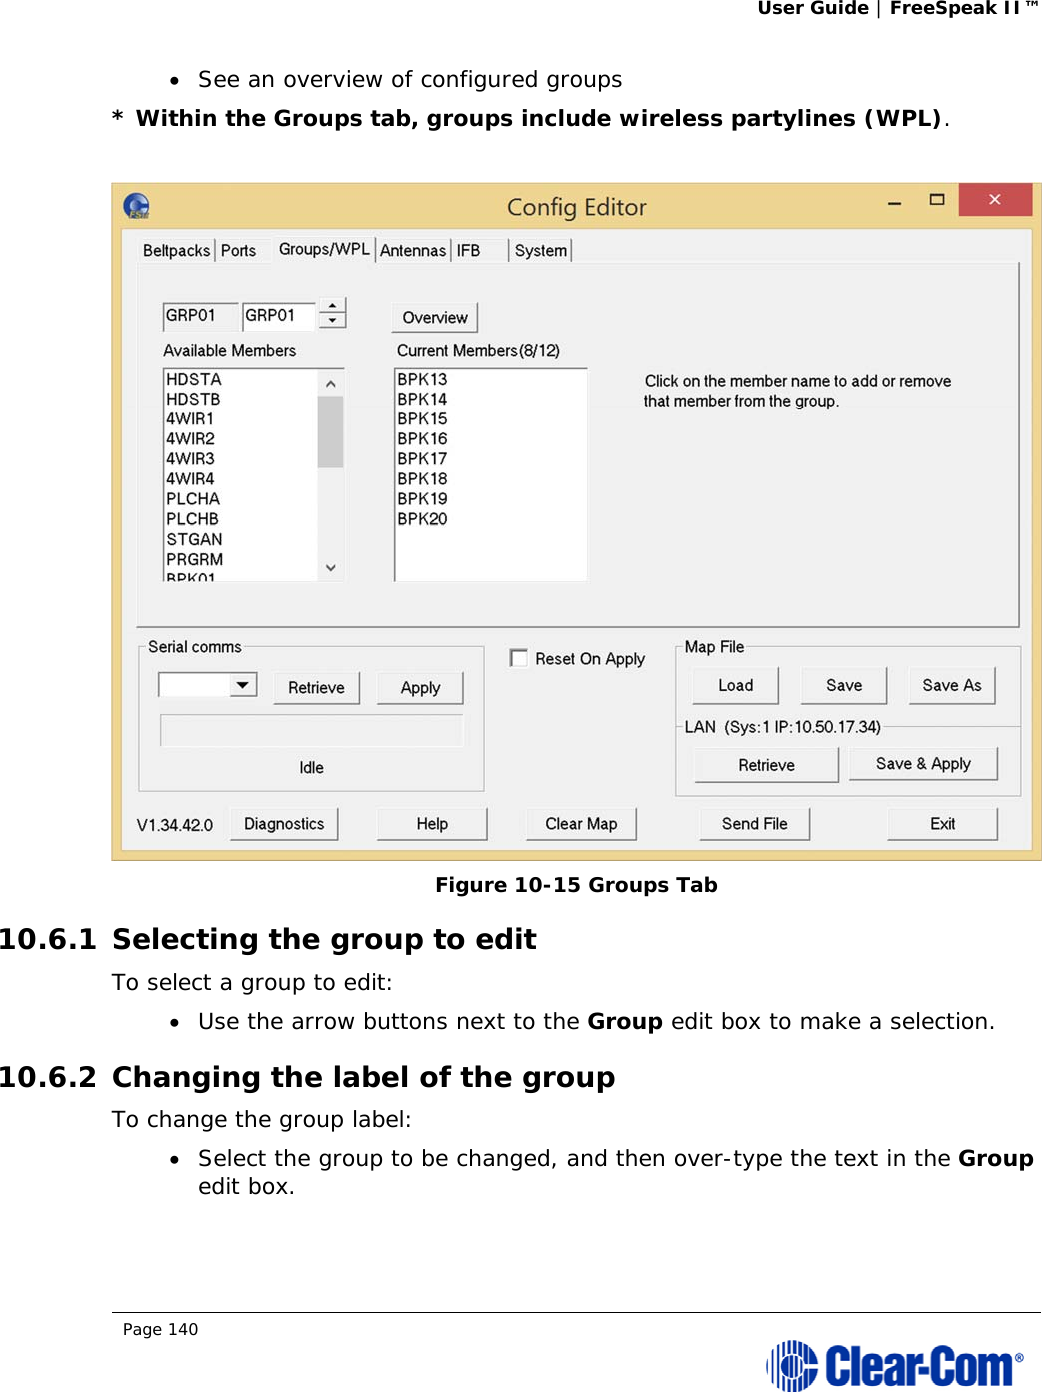 User Guide | FreeSpeak II™  Page 140   See an overview of configured groups * Within the Groups tab, groups include wireless partylines (WPL).   Figure 10-15 Groups Tab 10.6.1 Selecting the group to edit To select a group to edit:  Use the arrow buttons next to the Group edit box to make a selection. 10.6.2 Changing the label of the group To change the group label:  Select the group to be changed, and then over-type the text in the Group edit box. 